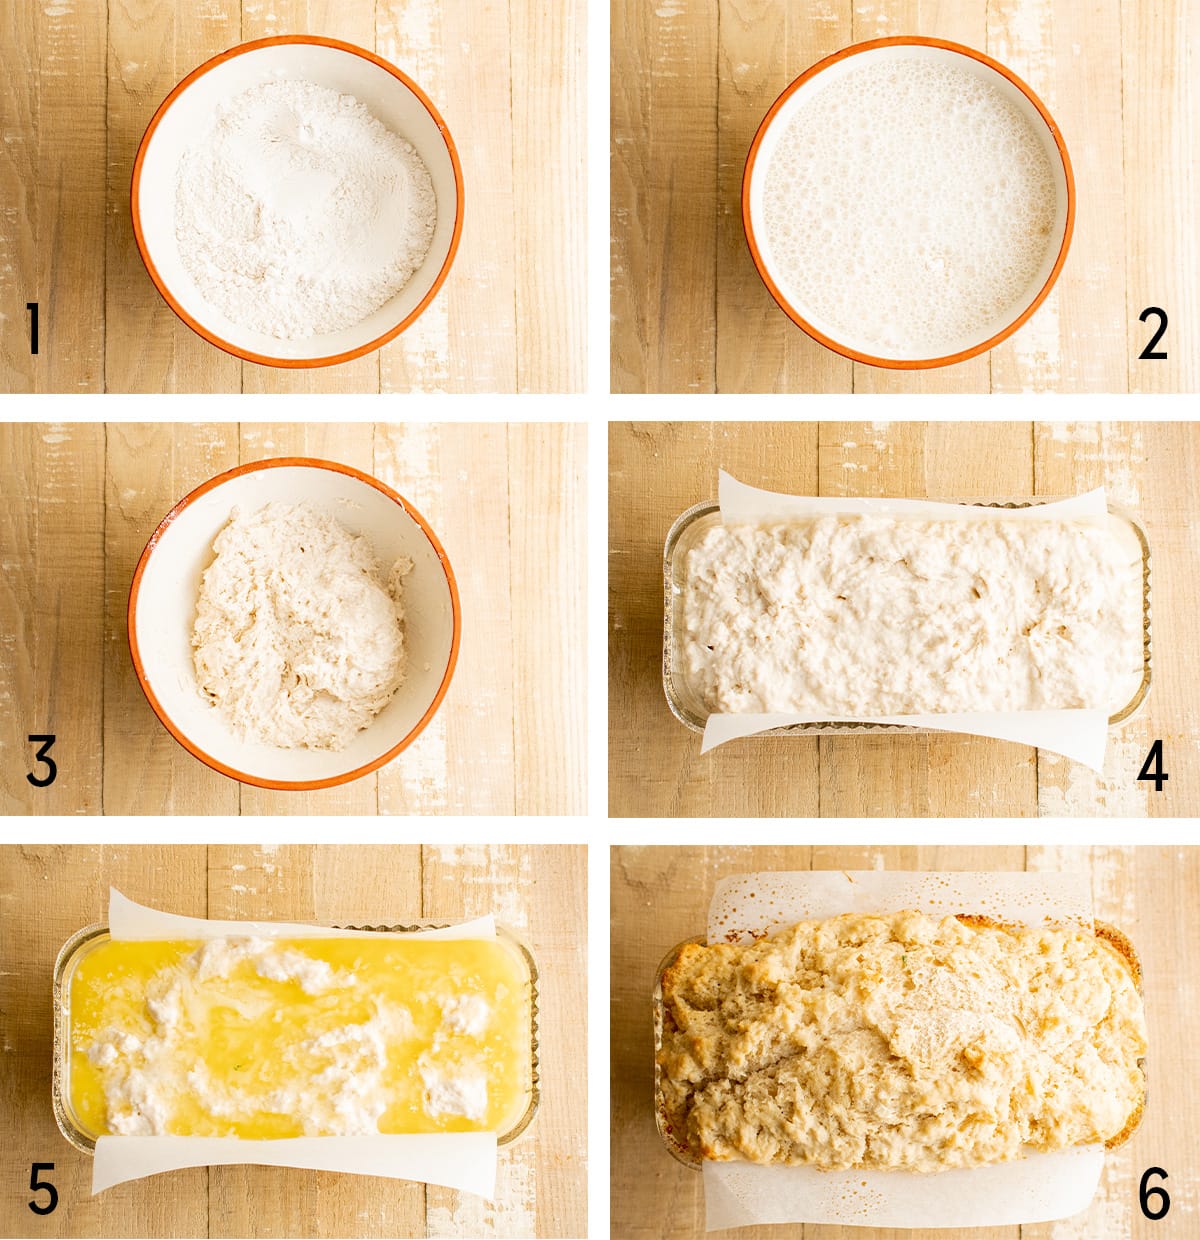 Collage of images showing the steps to make beer bread. 